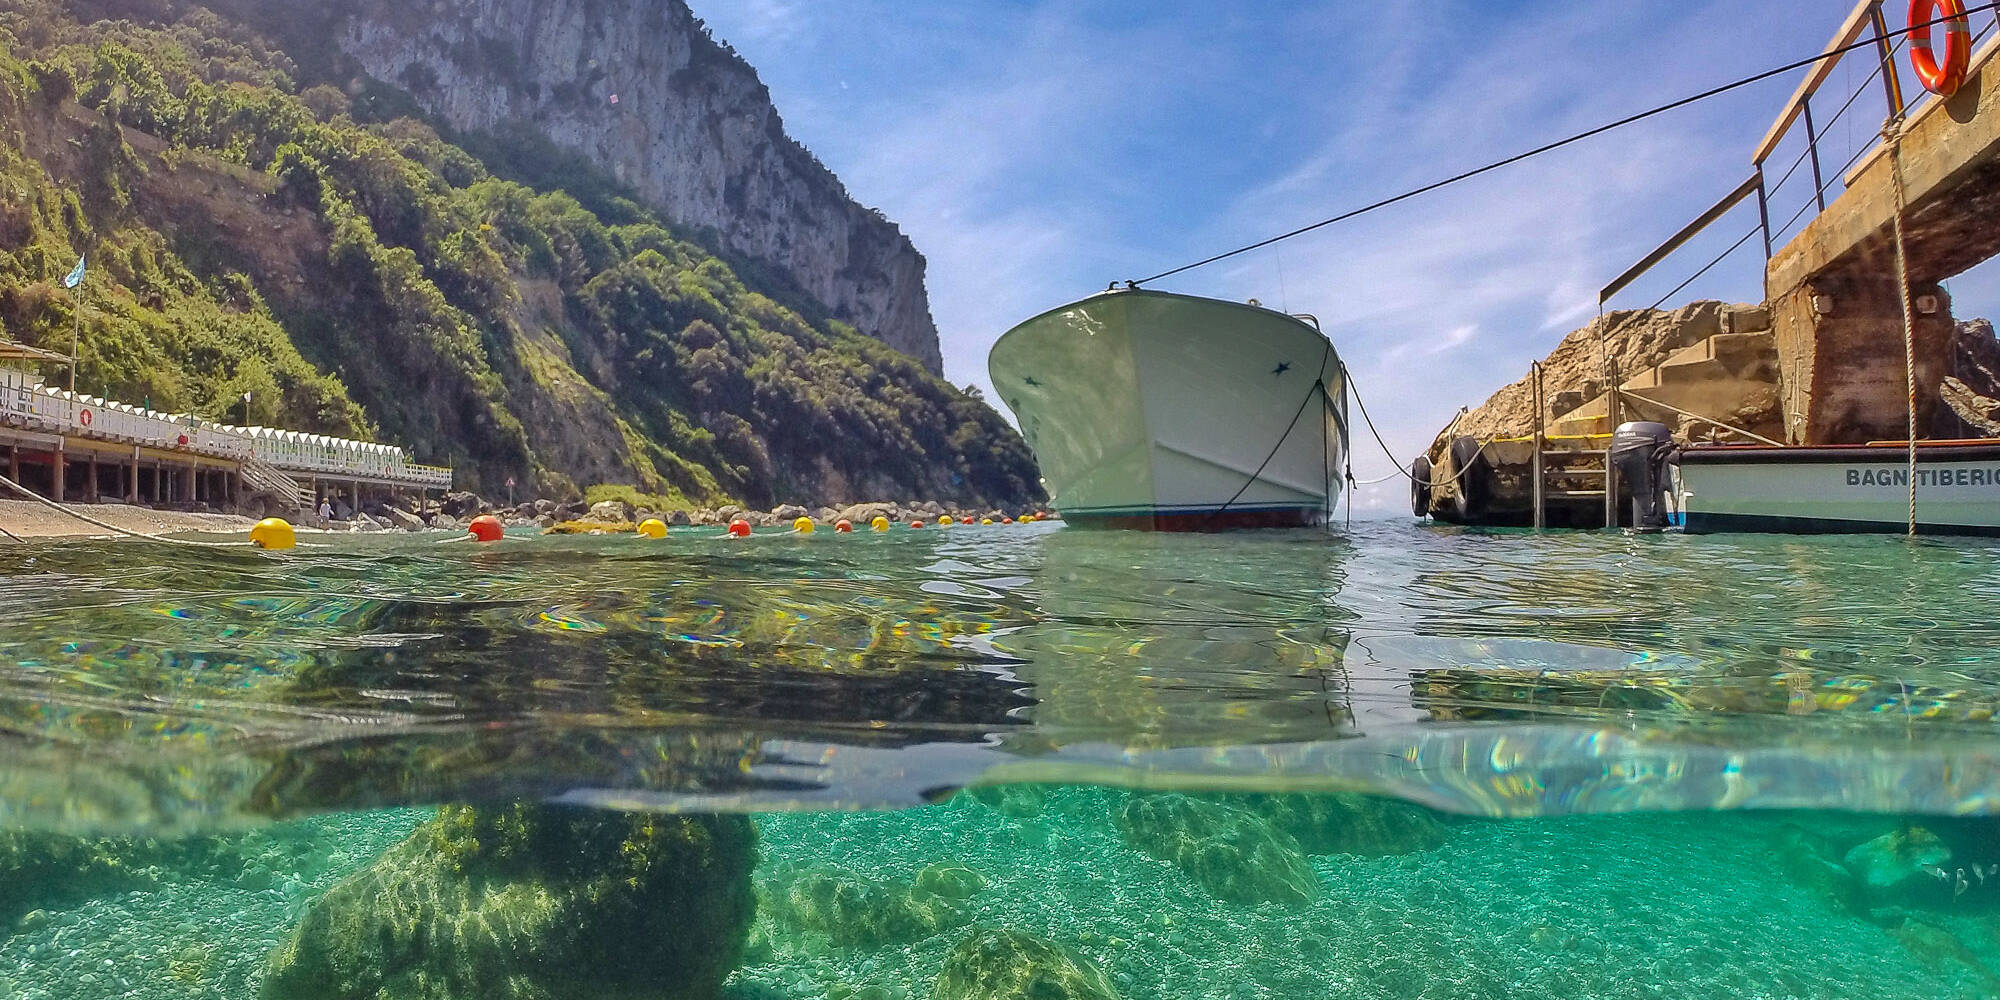 A beach club, restaurant, and boat<br>for the perfect day on Capri